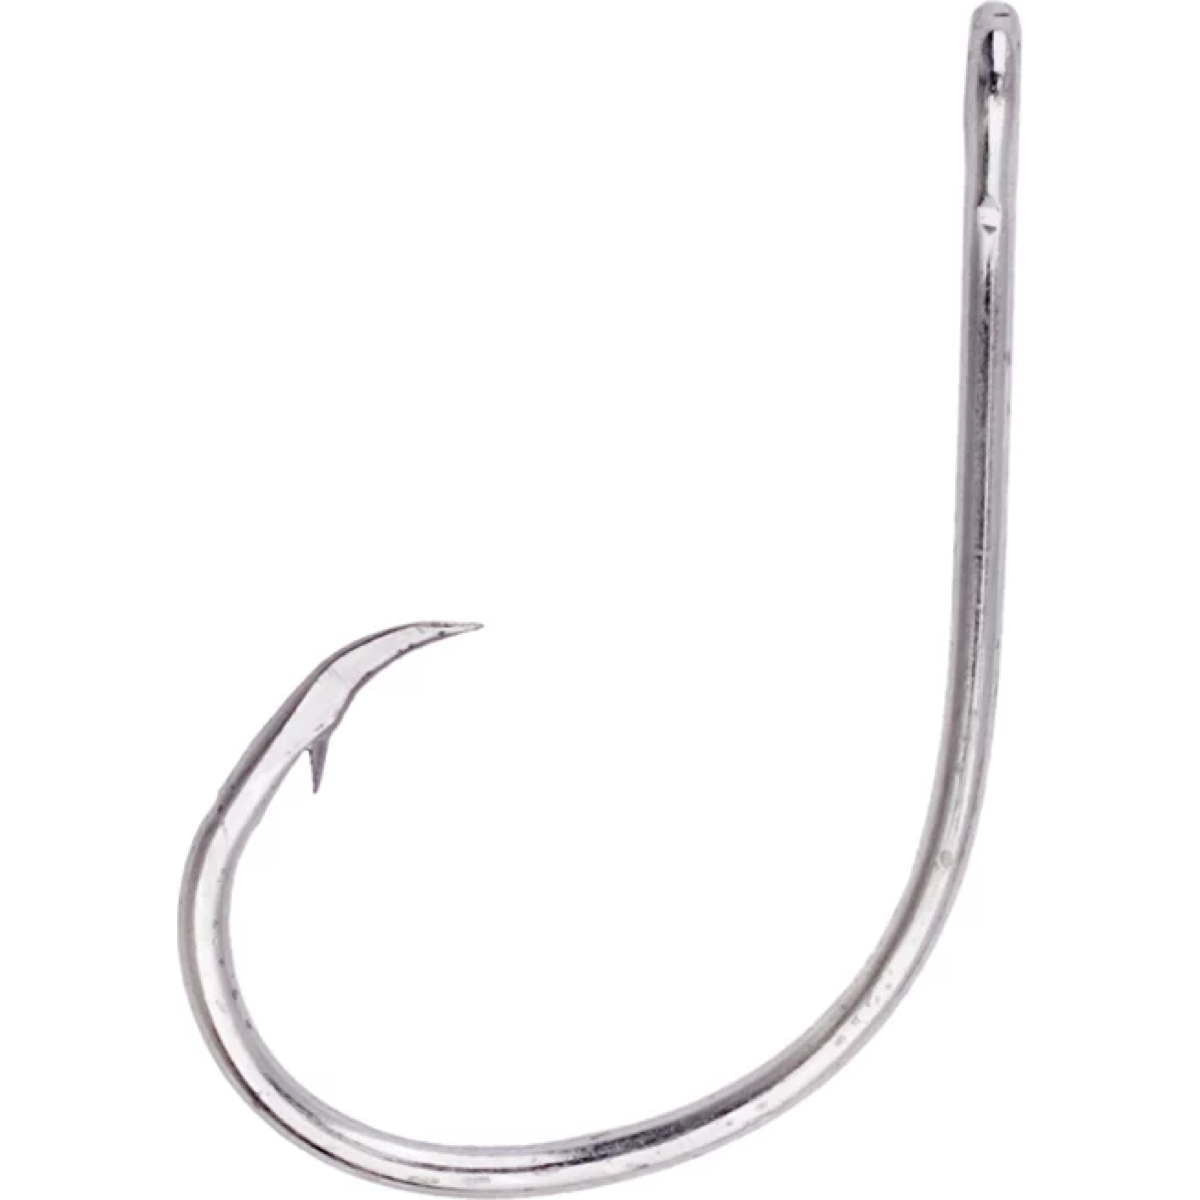 Photo of Eagle Claw Lazer Circle Sea Catfish Hook for sale at United Tackle Shops.